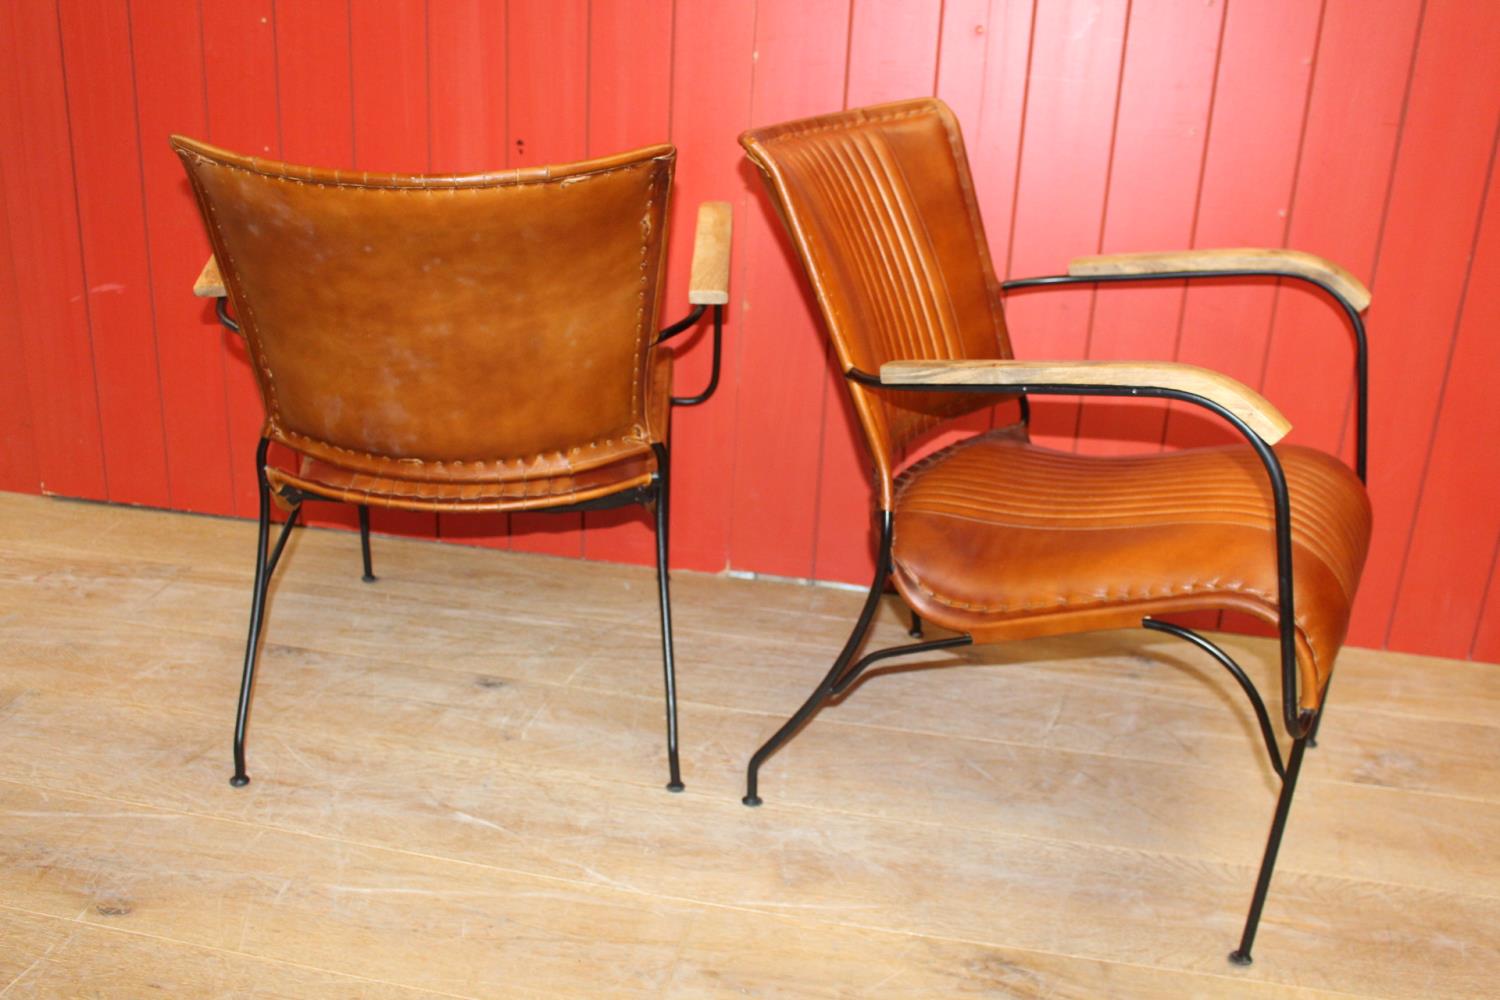 Pair of leather upholstered metal framed Baker's chairs - Image 2 of 2